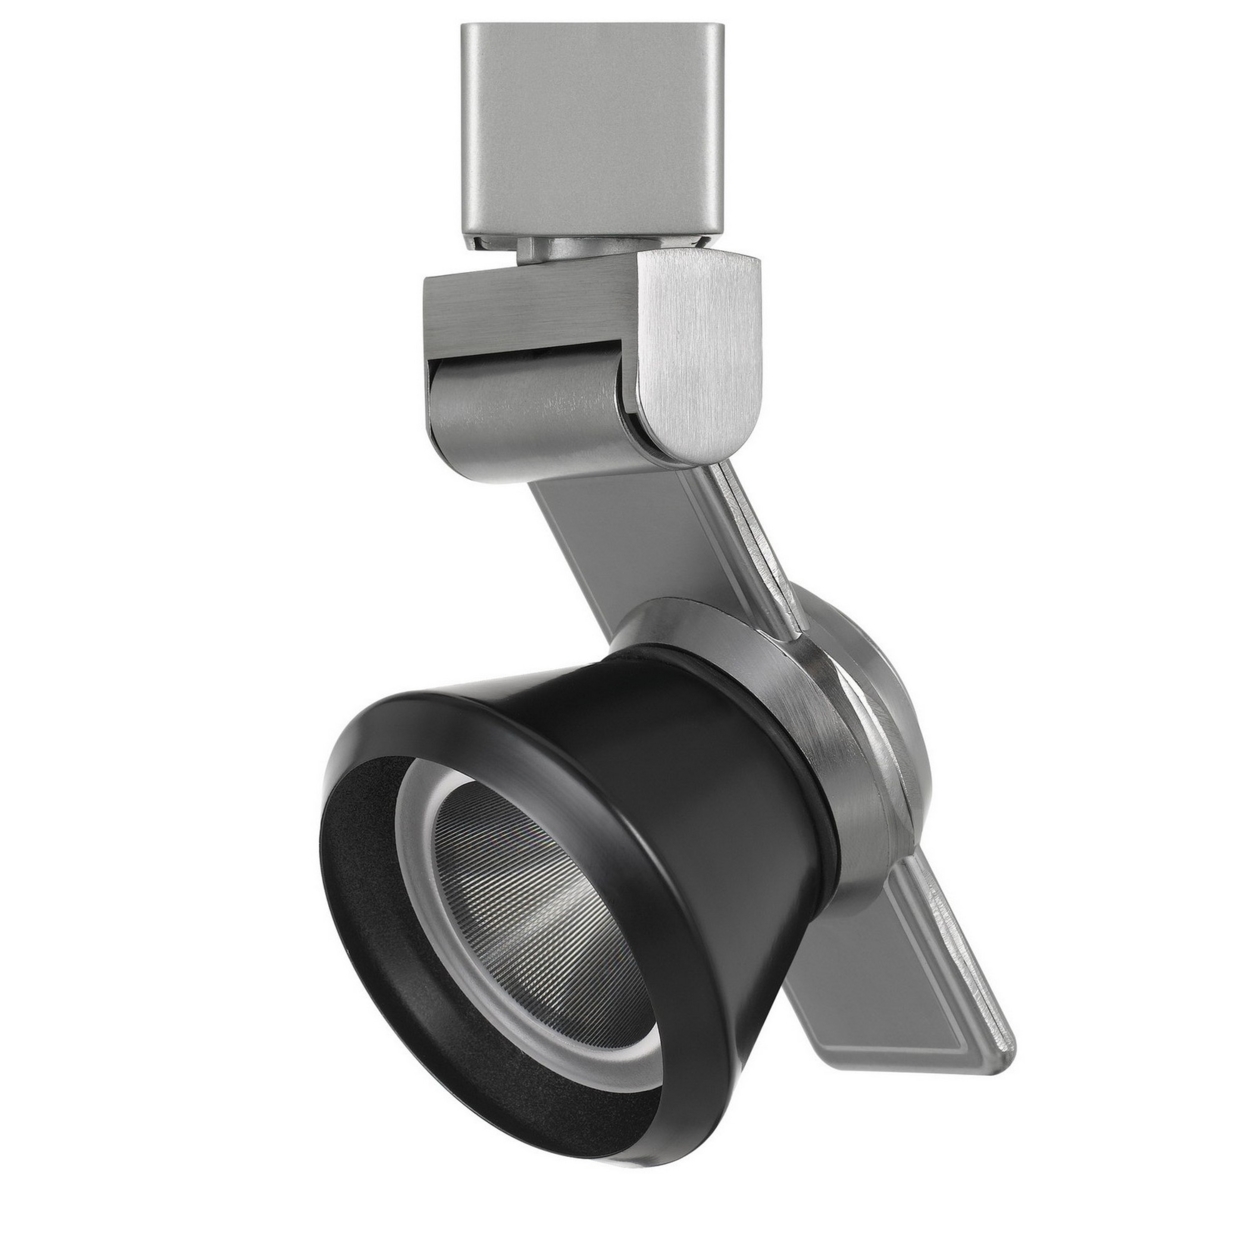 12W Integrated Metal And Polycarbonate LED Track Fixture, Silver And Black- Saltoro Sherpi